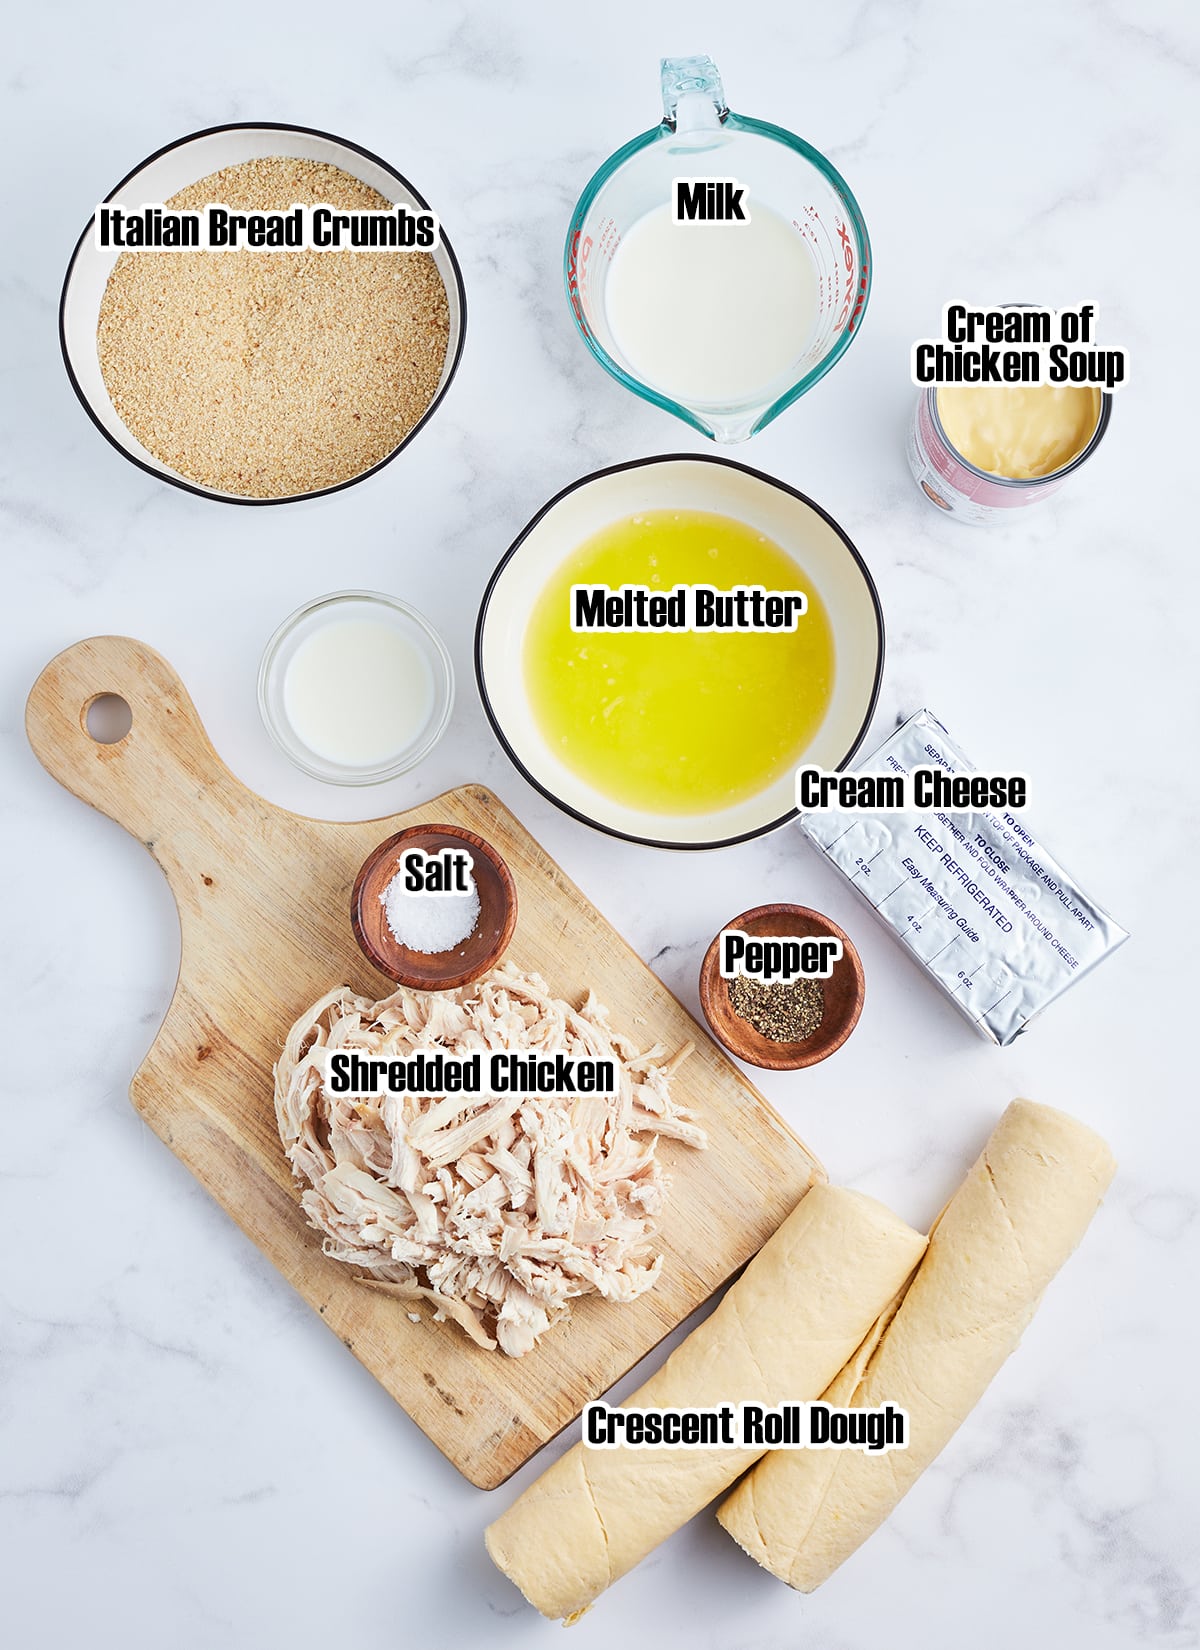 The ingredients needed to make chicken crescent roll ups with labels on them.